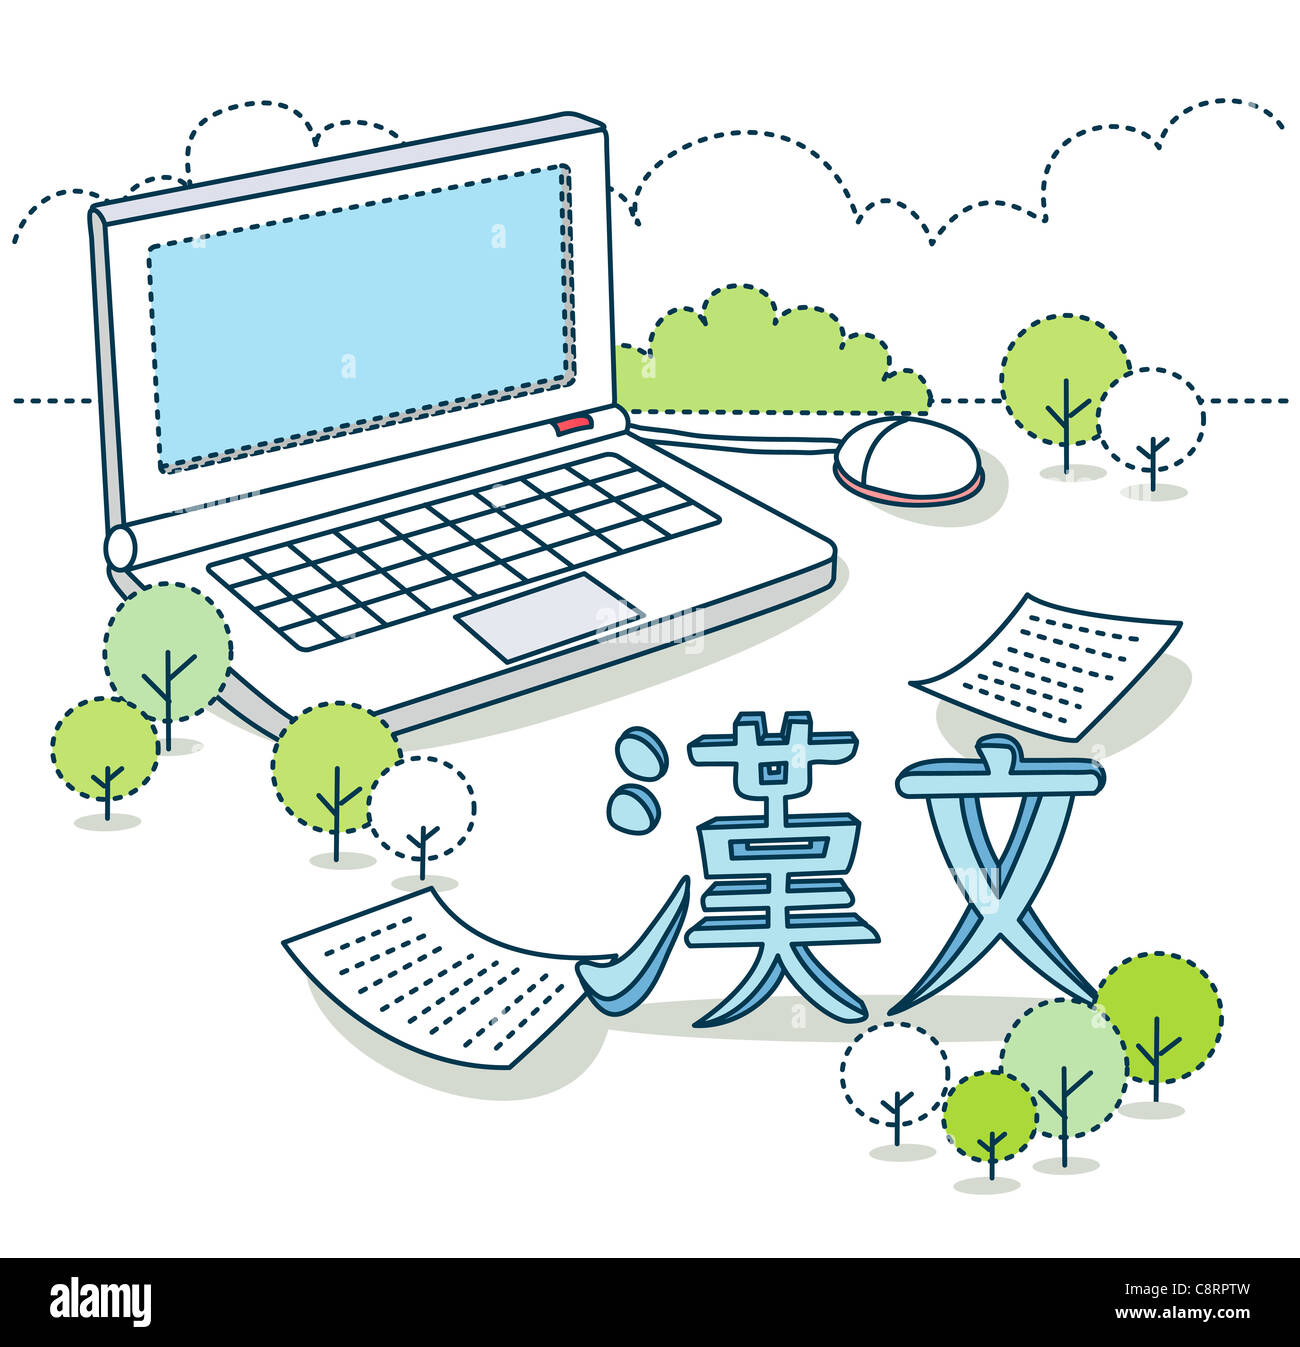 Illustration on laptop and non-western script Stock Photo